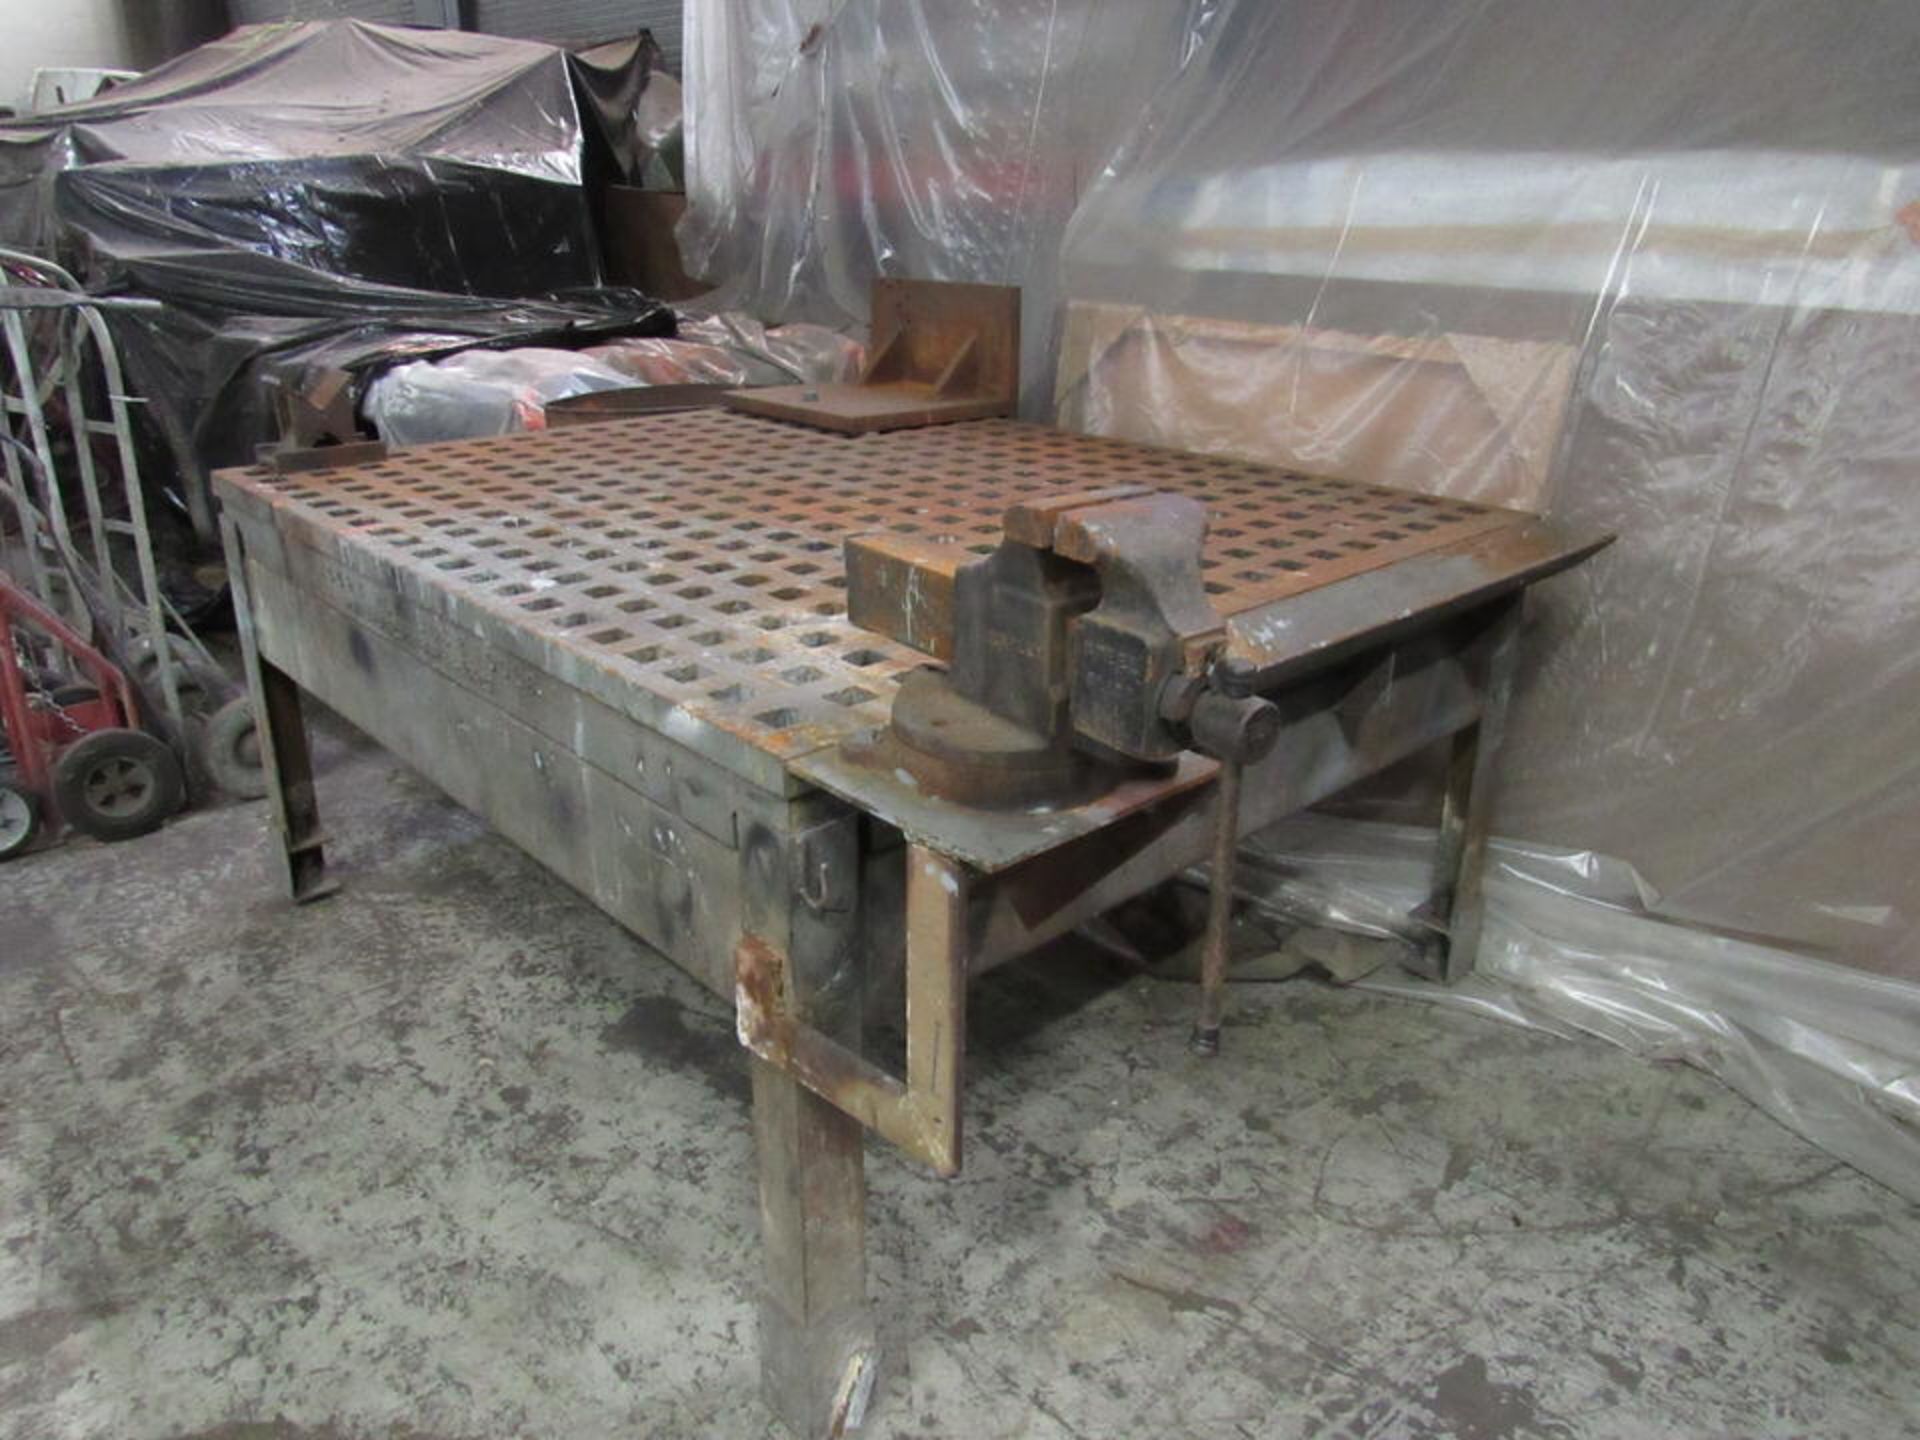 72" x 60" x 35" High Acorn Platens & Tools Welding Table with Vise and Accessories (LOCATION: 3603 - Image 3 of 7